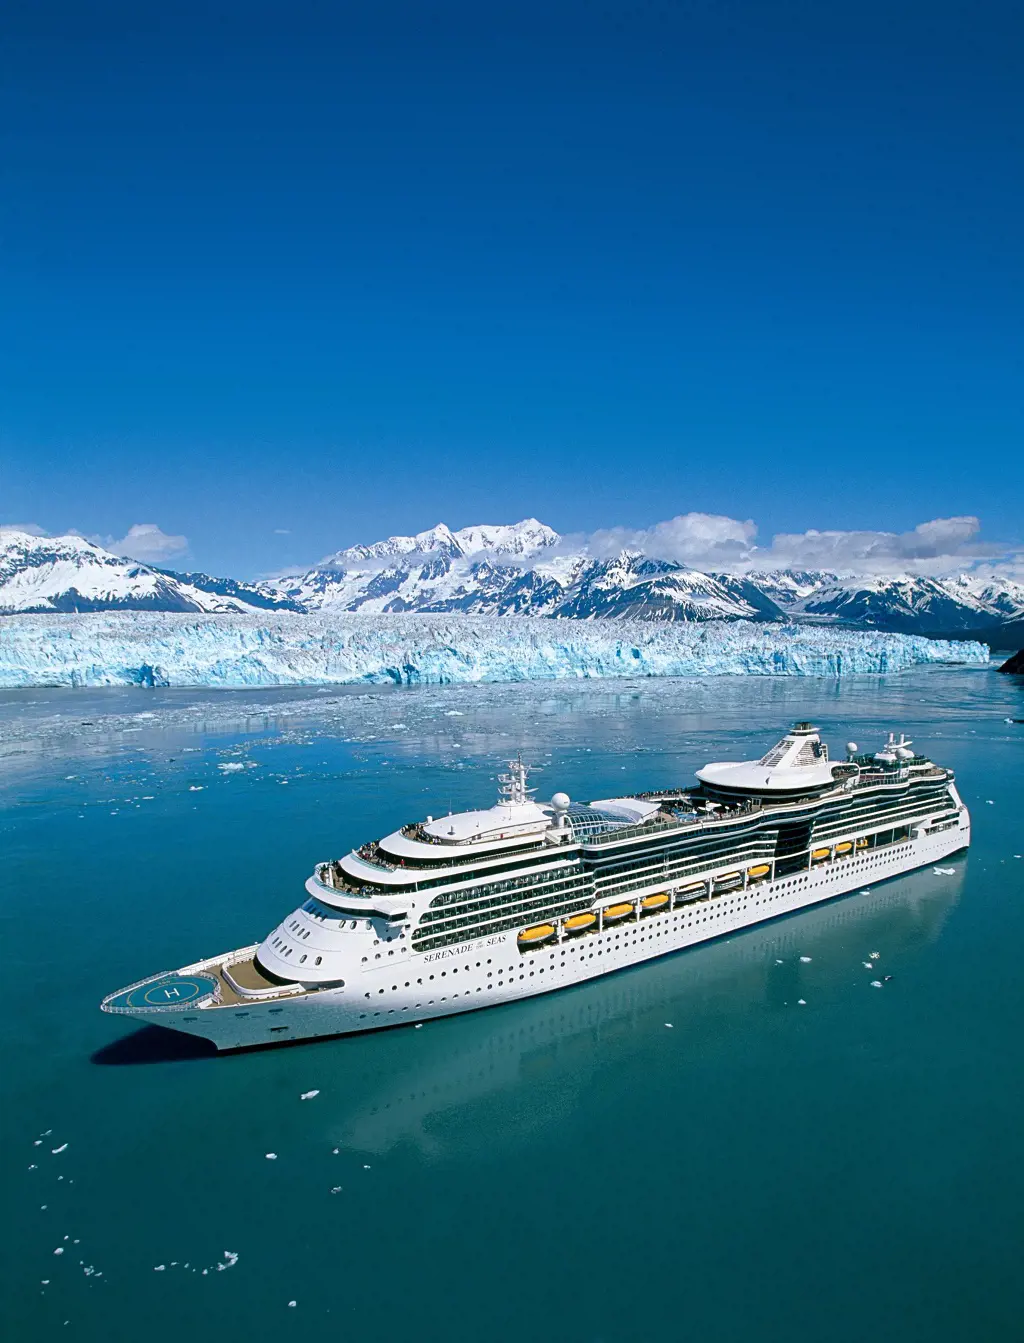 Serenade Of The Seas is a Radiance-class cruise owned by Royal Caribbean Group.